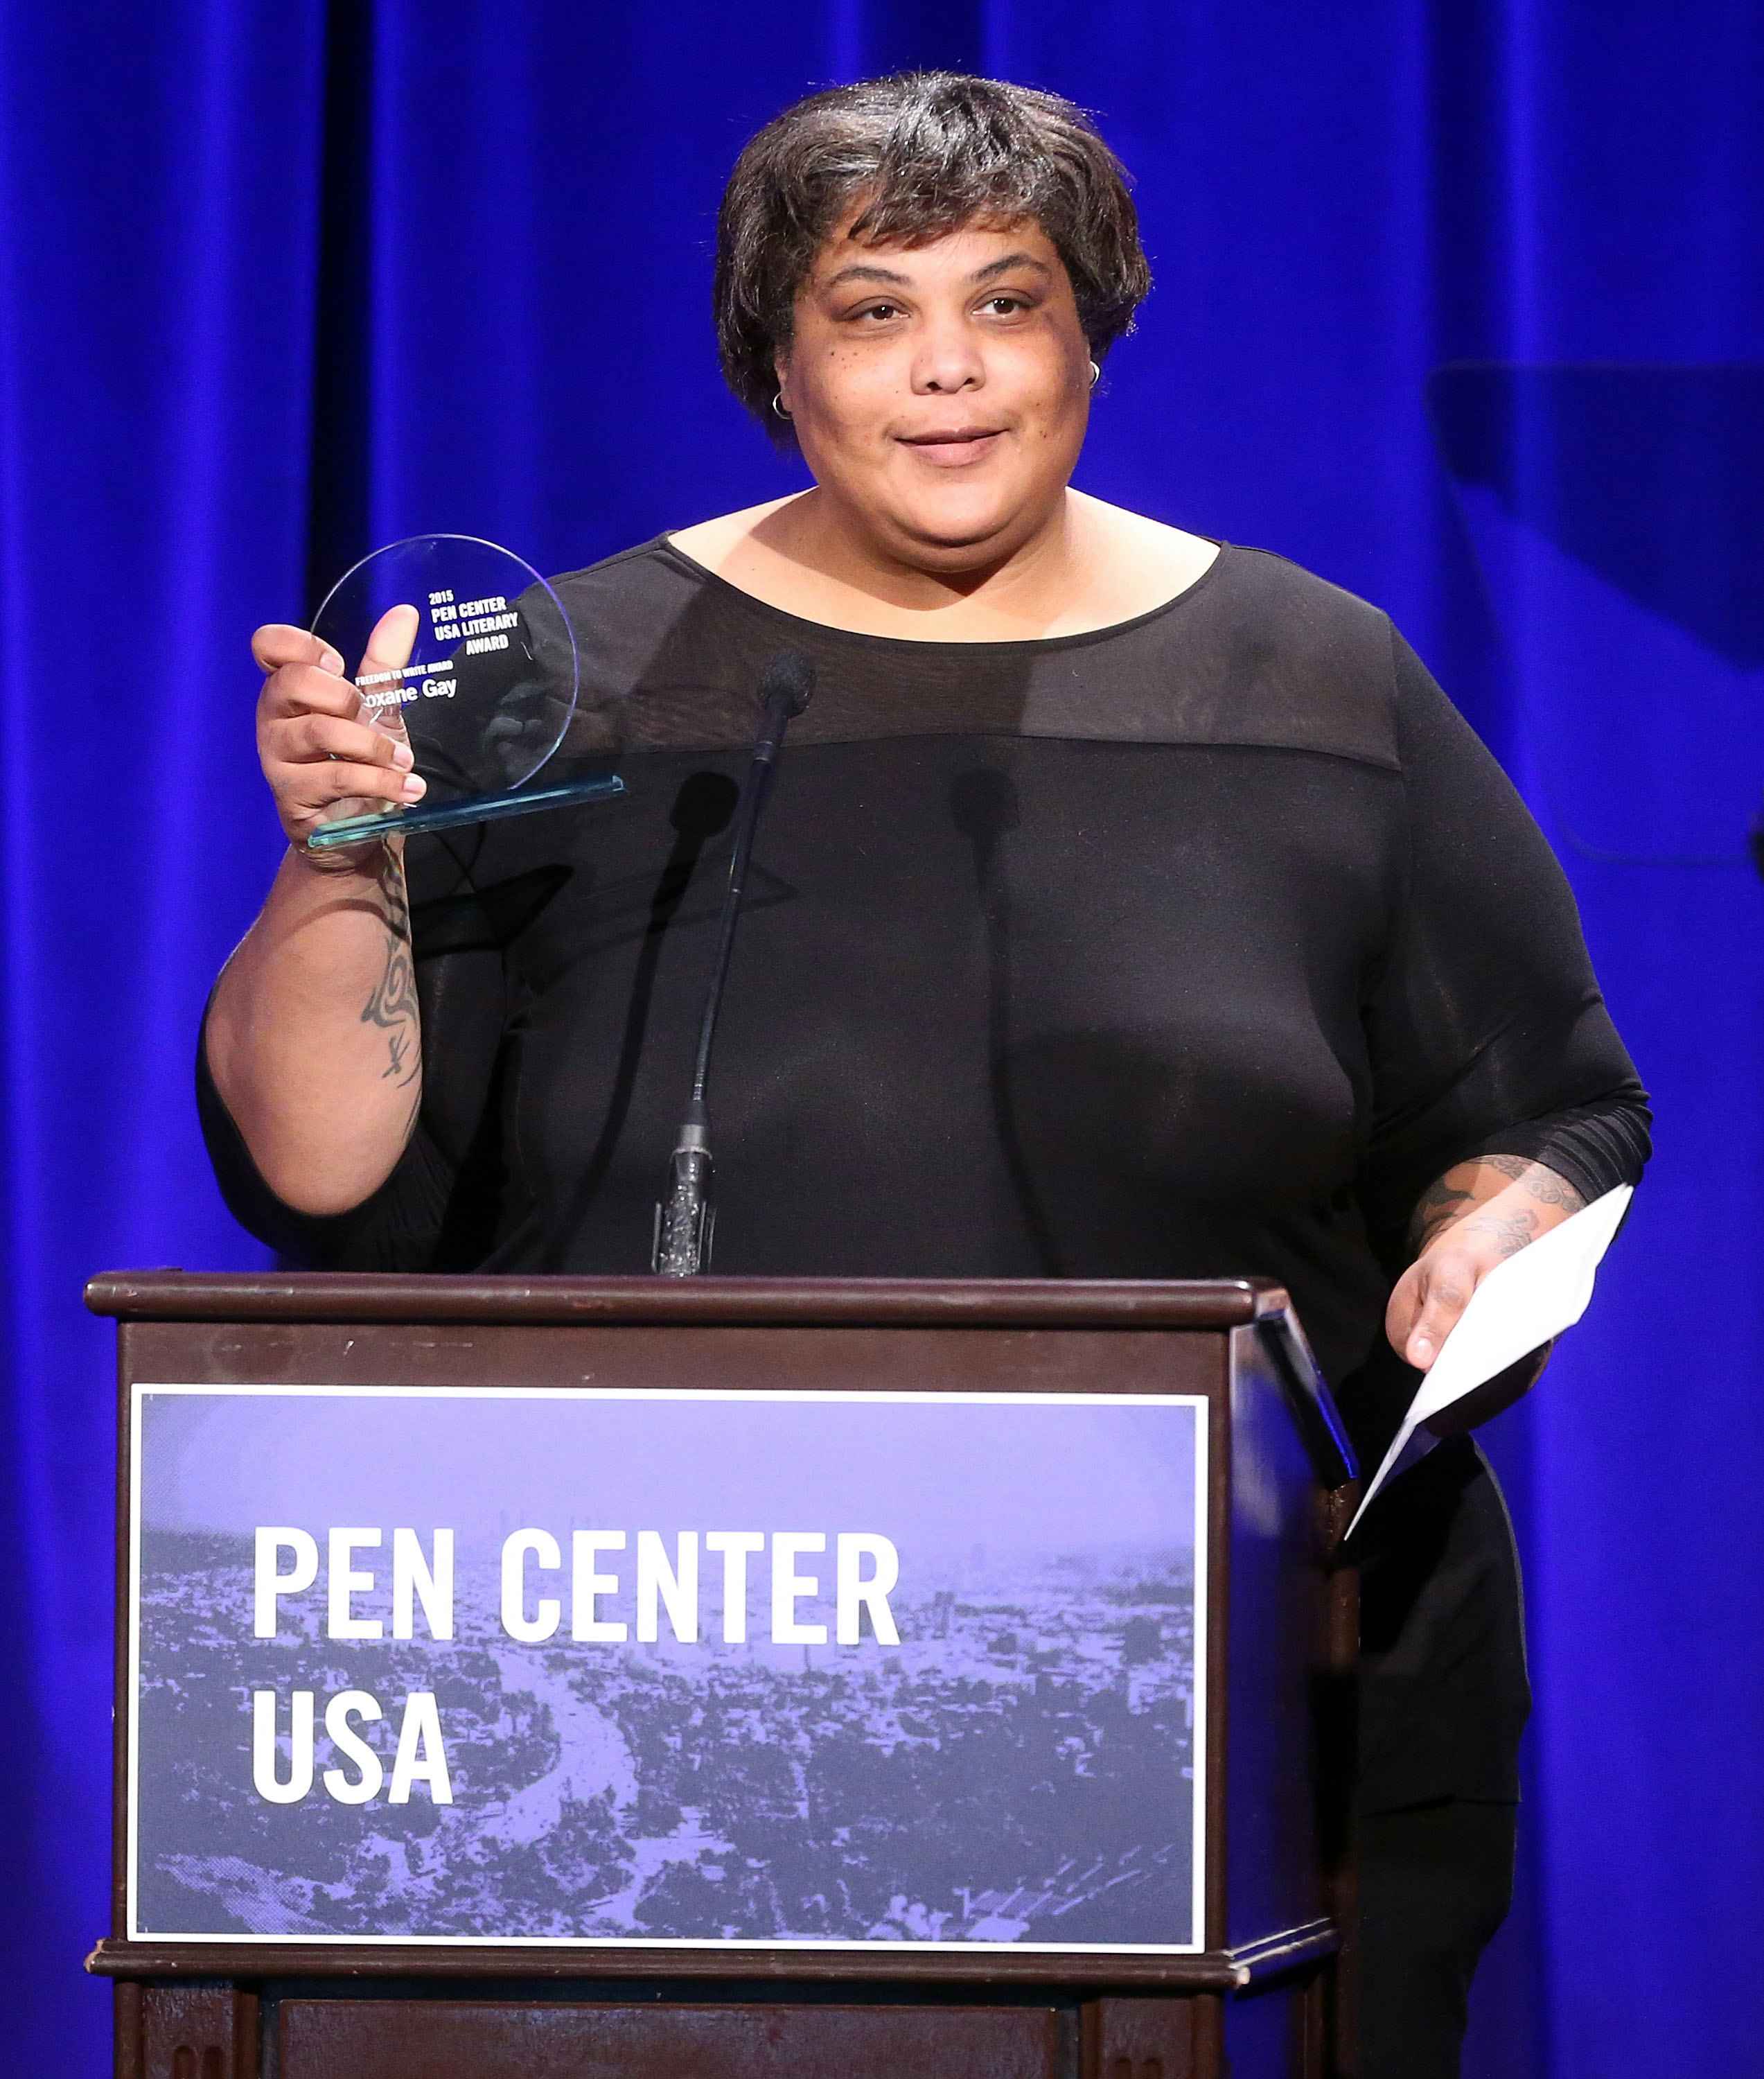 roxane gay will was wrong thinskinned